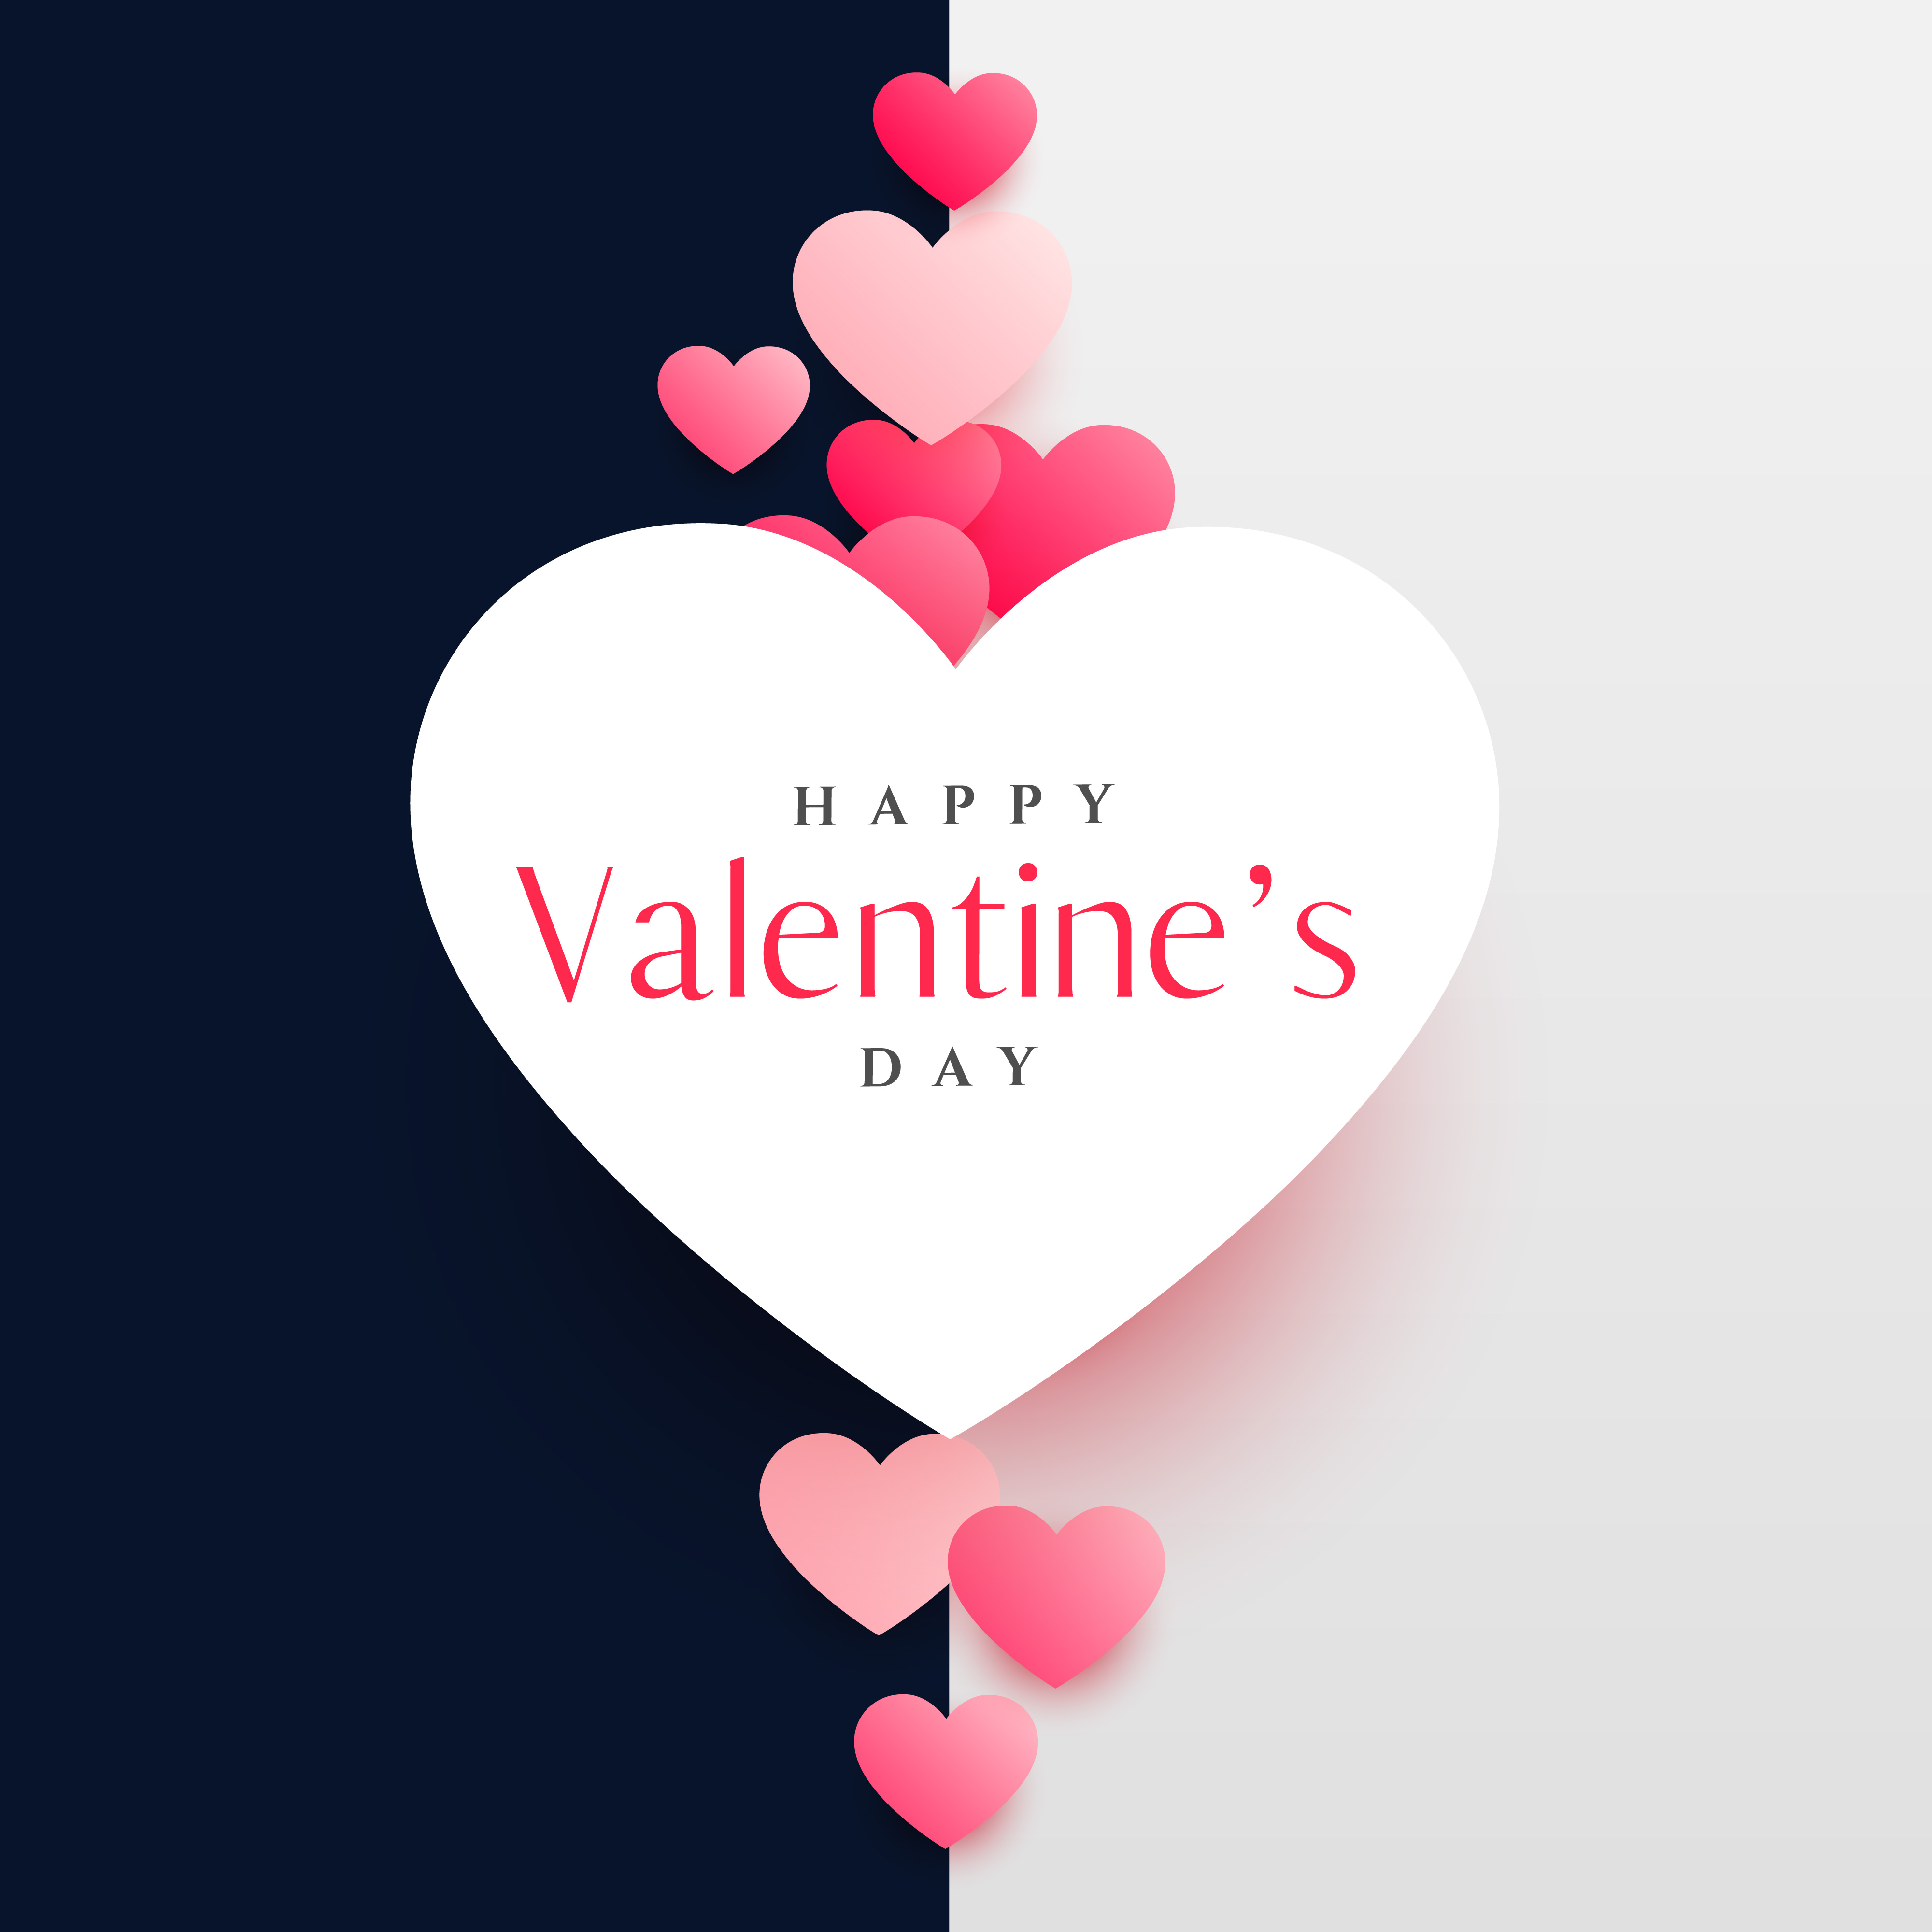 modern happy valentine's day greeting card design template - Download Free Vector Art ...